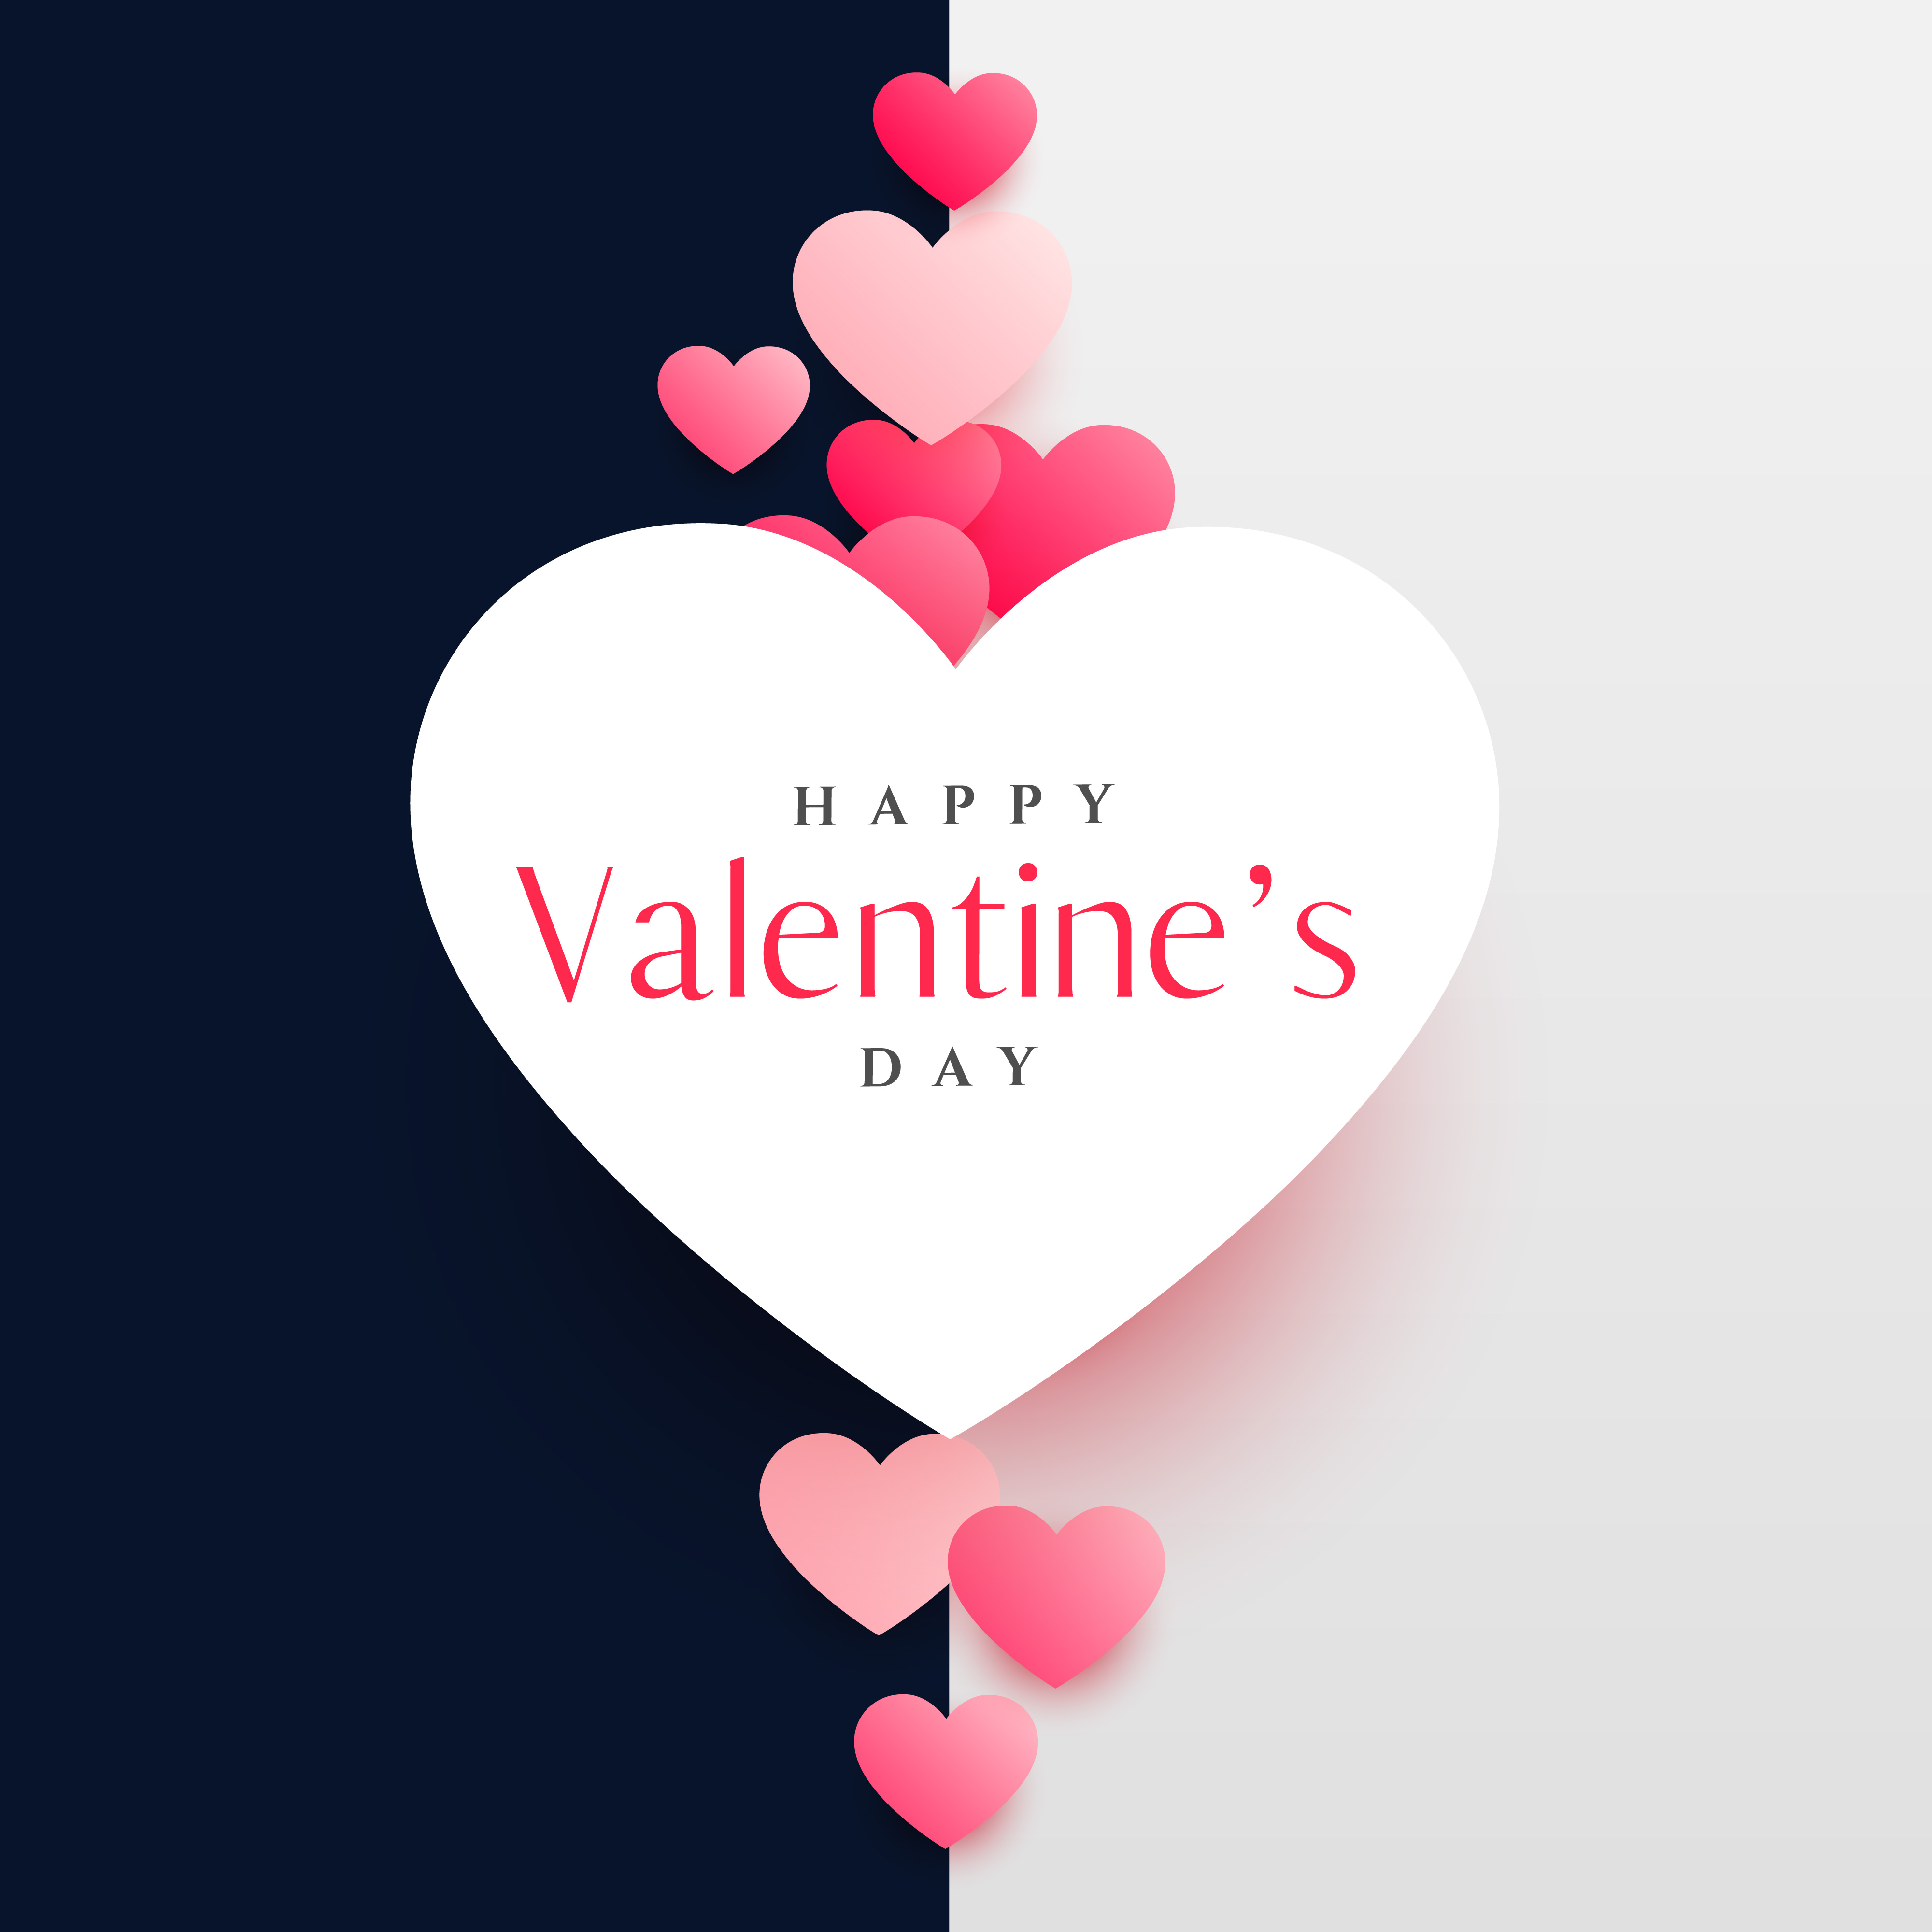 modern happy valentine's day greeting card design template - Download Free Vector Art ...